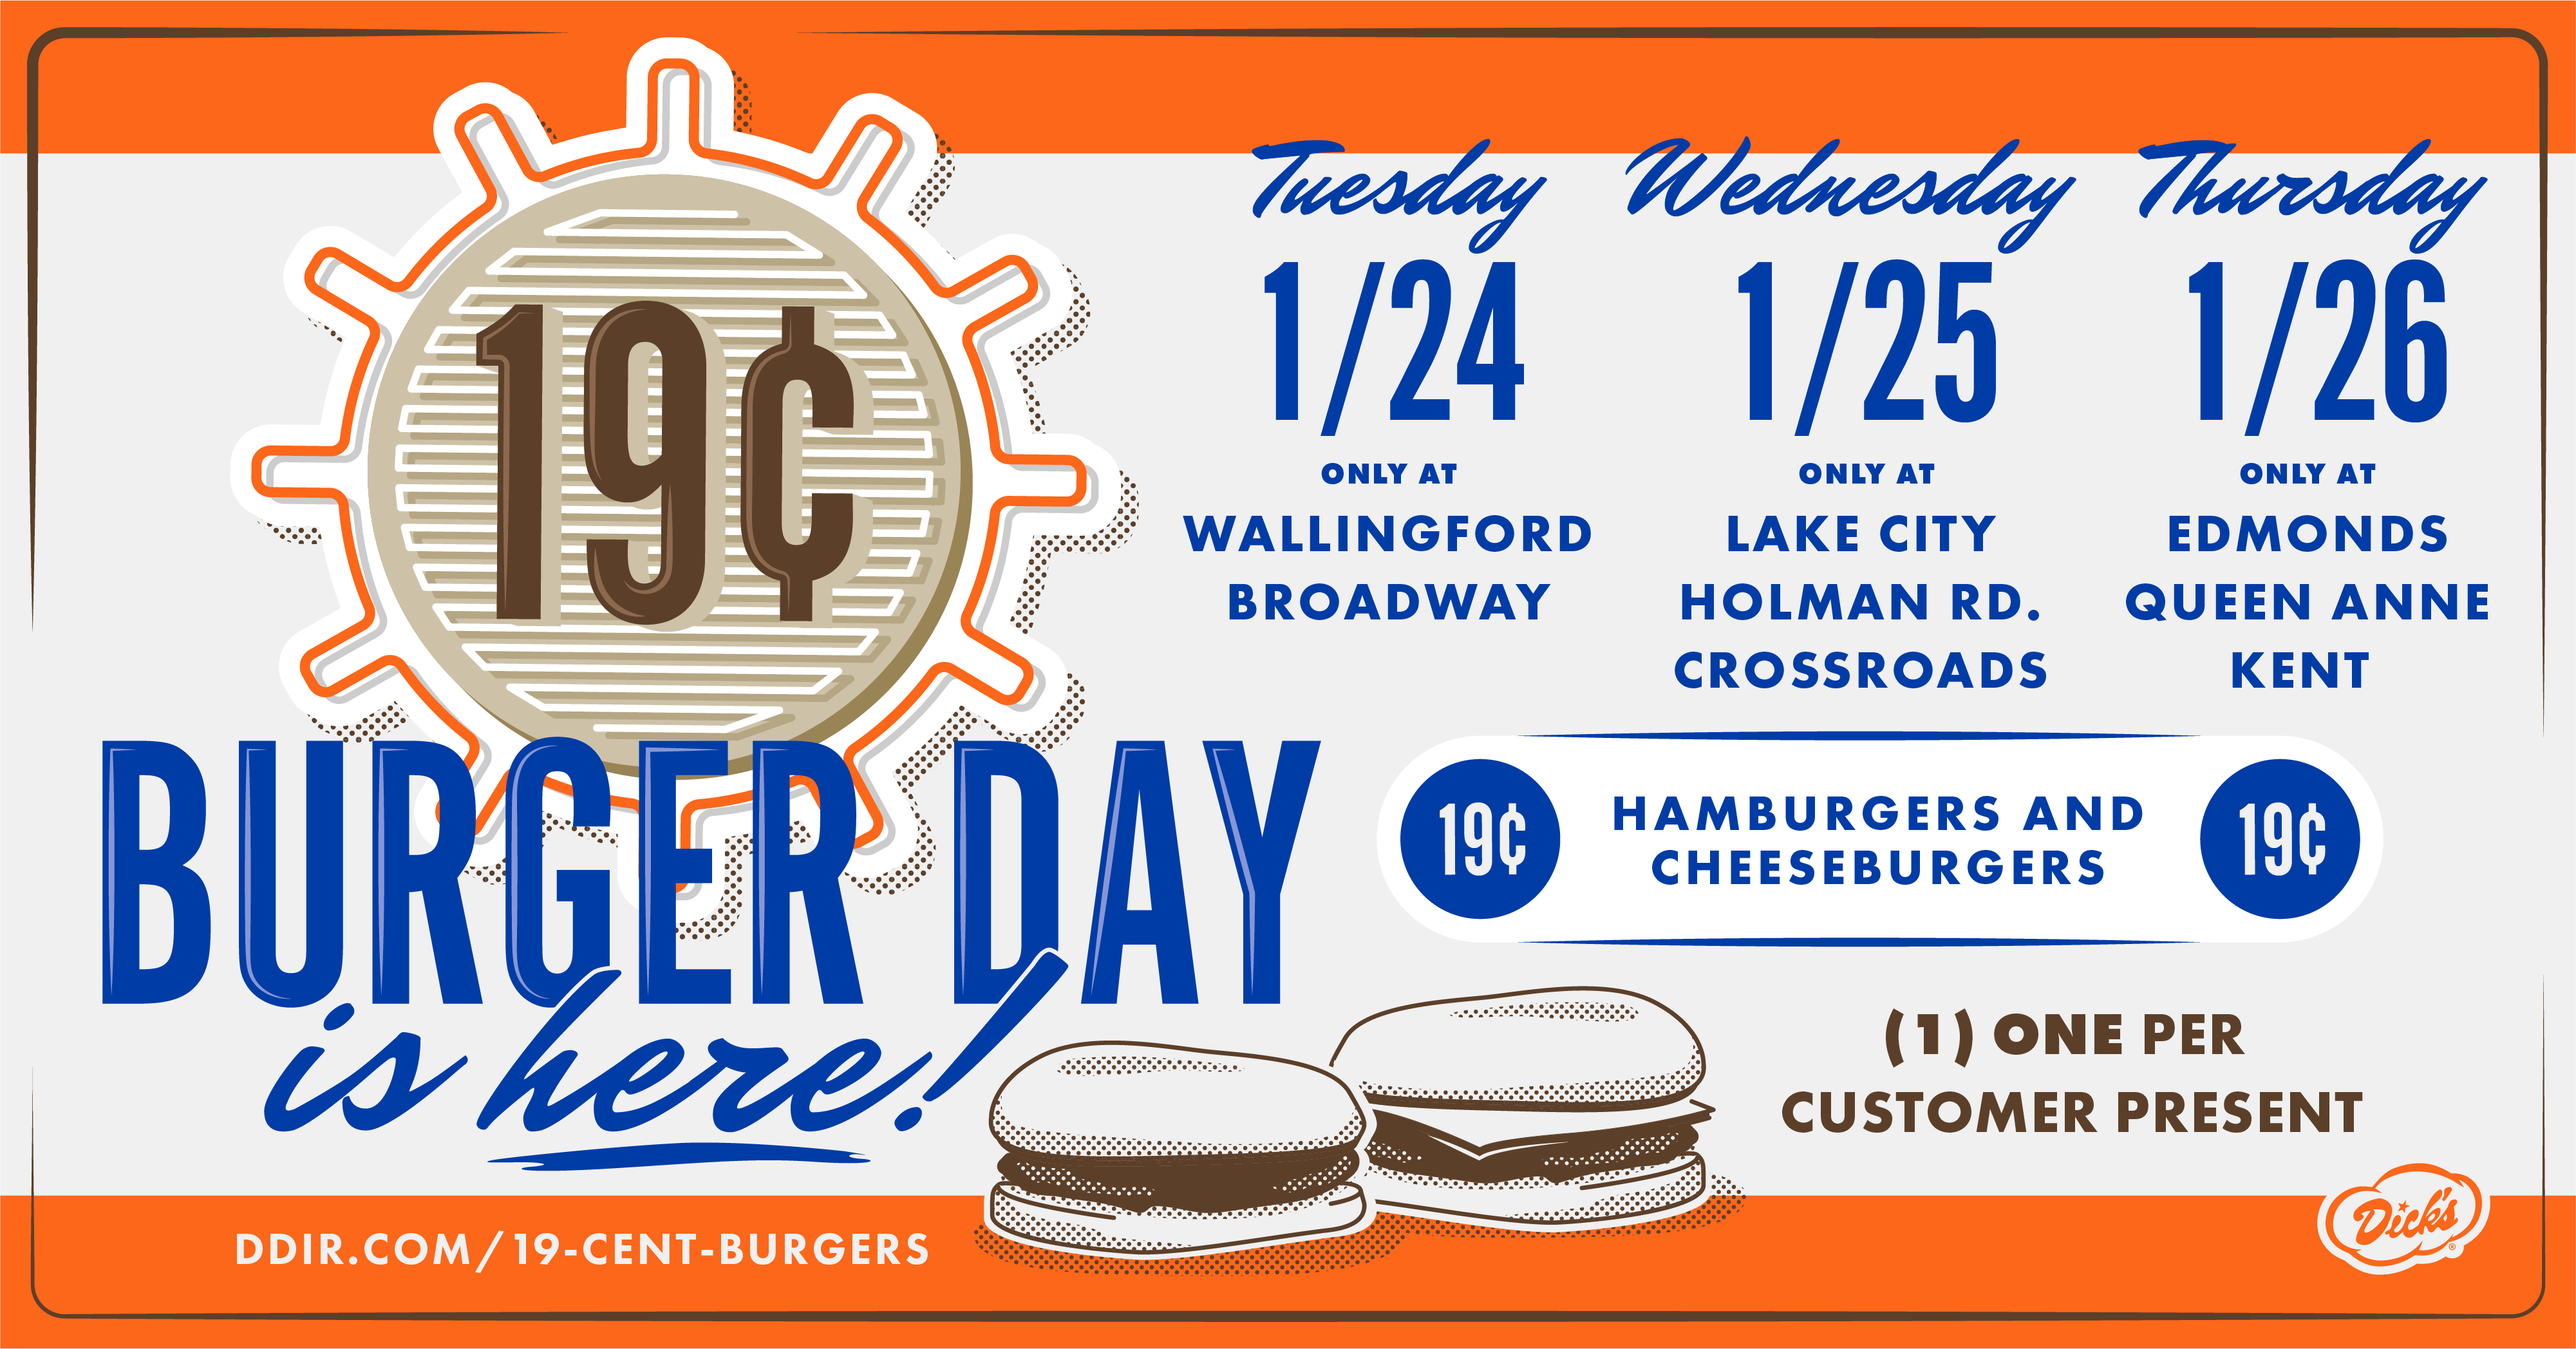 What's your 19¢ day? Tuesday January 24th  Head to our Wallingford or Broadway location for a 19¢ burger. Wednesday January 25th  Head to our Lake City, Holman Road, or Crossroads location. Thursday January 26th  Head to our Edmonds, Queen Anne, or Kent location.